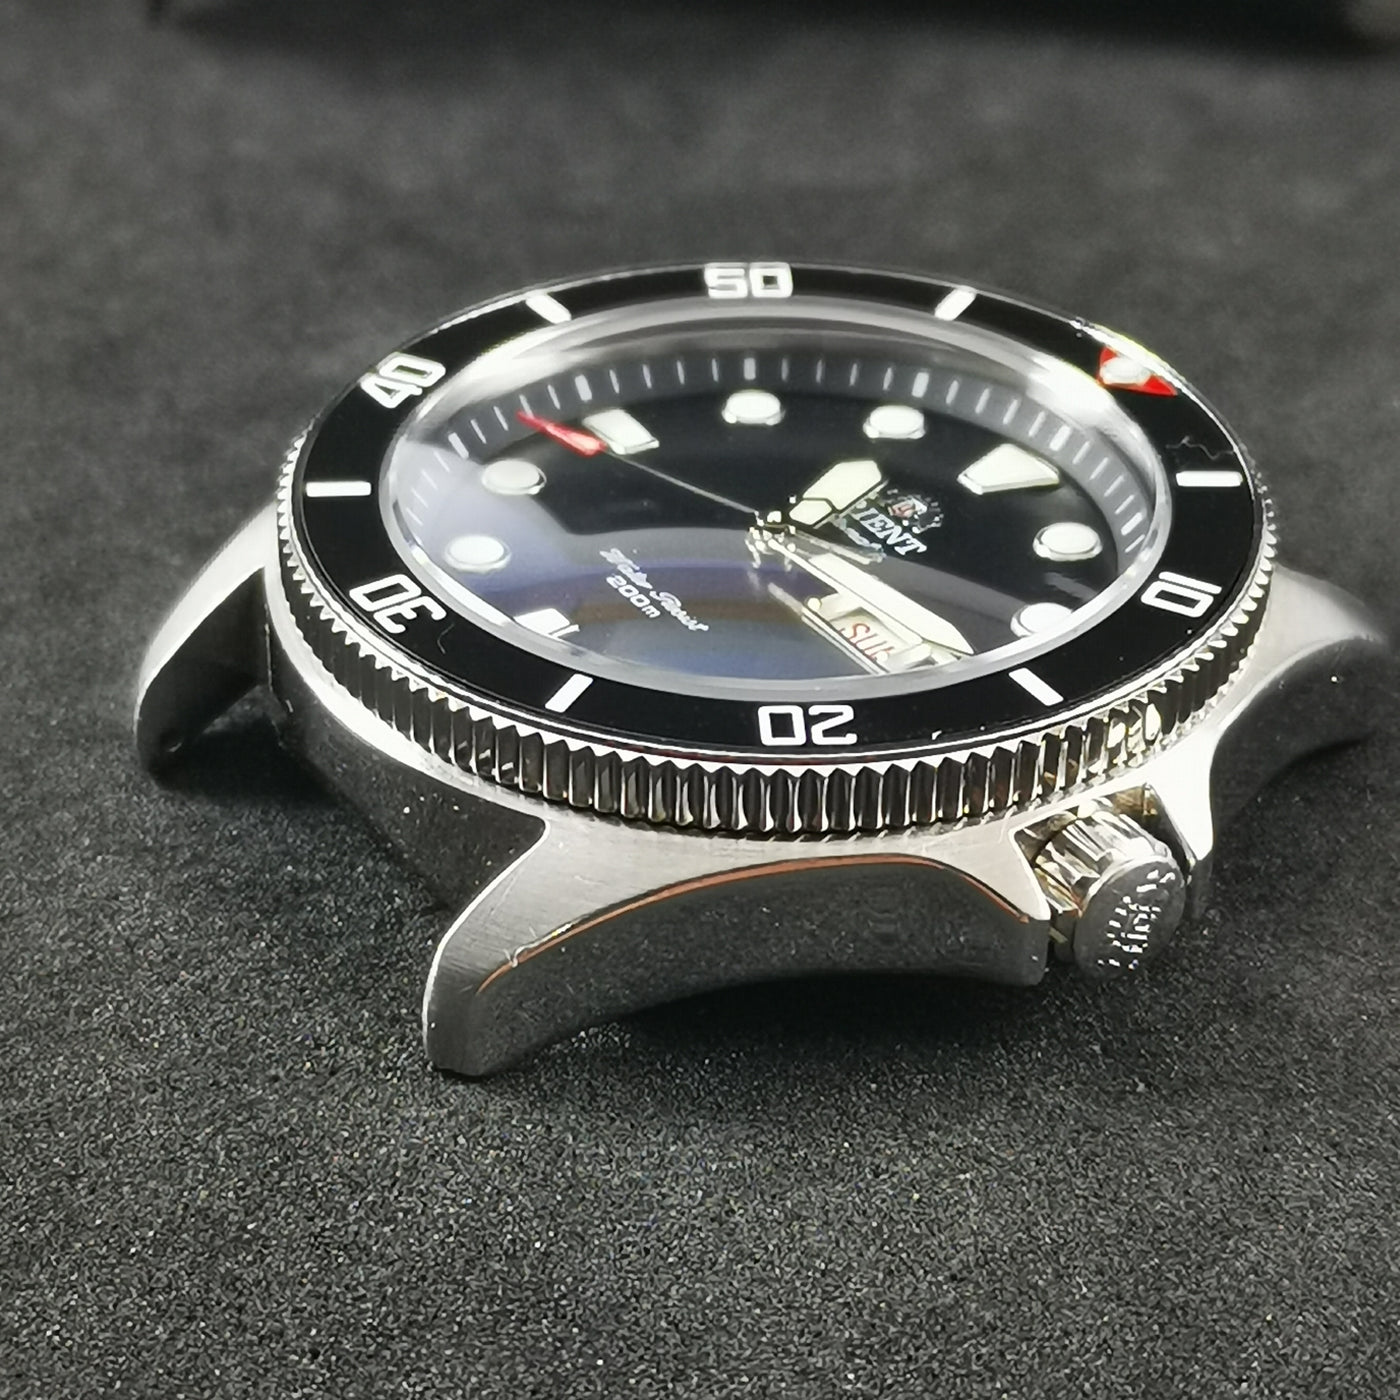 R0178 Orient Ray II - Polished Coin Edge Rotating Bezel